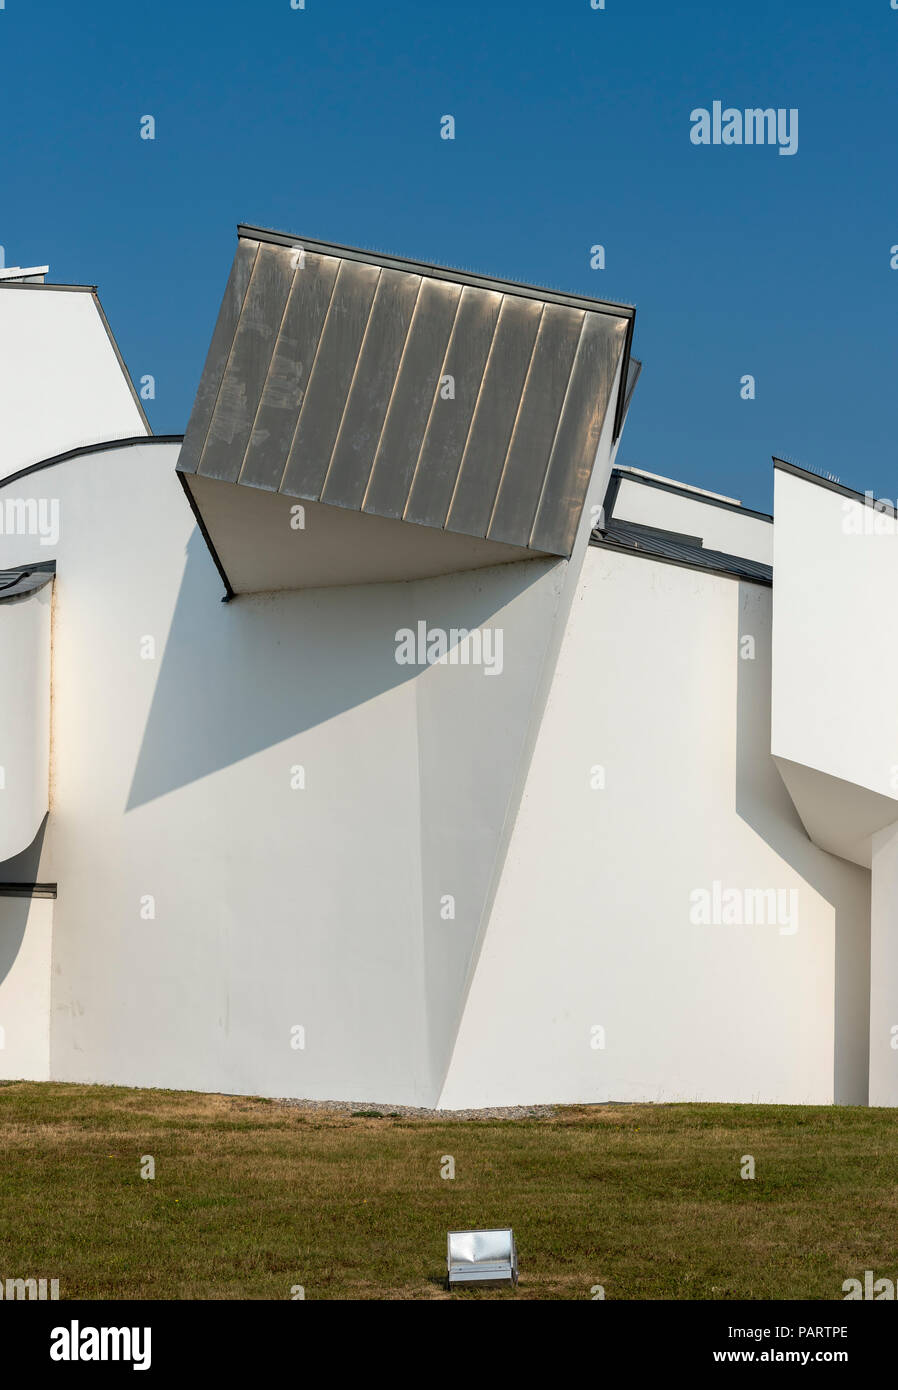 Vitra Design Museum building by Frank Gehry in Weil am Rhein, Germany Stock Photo